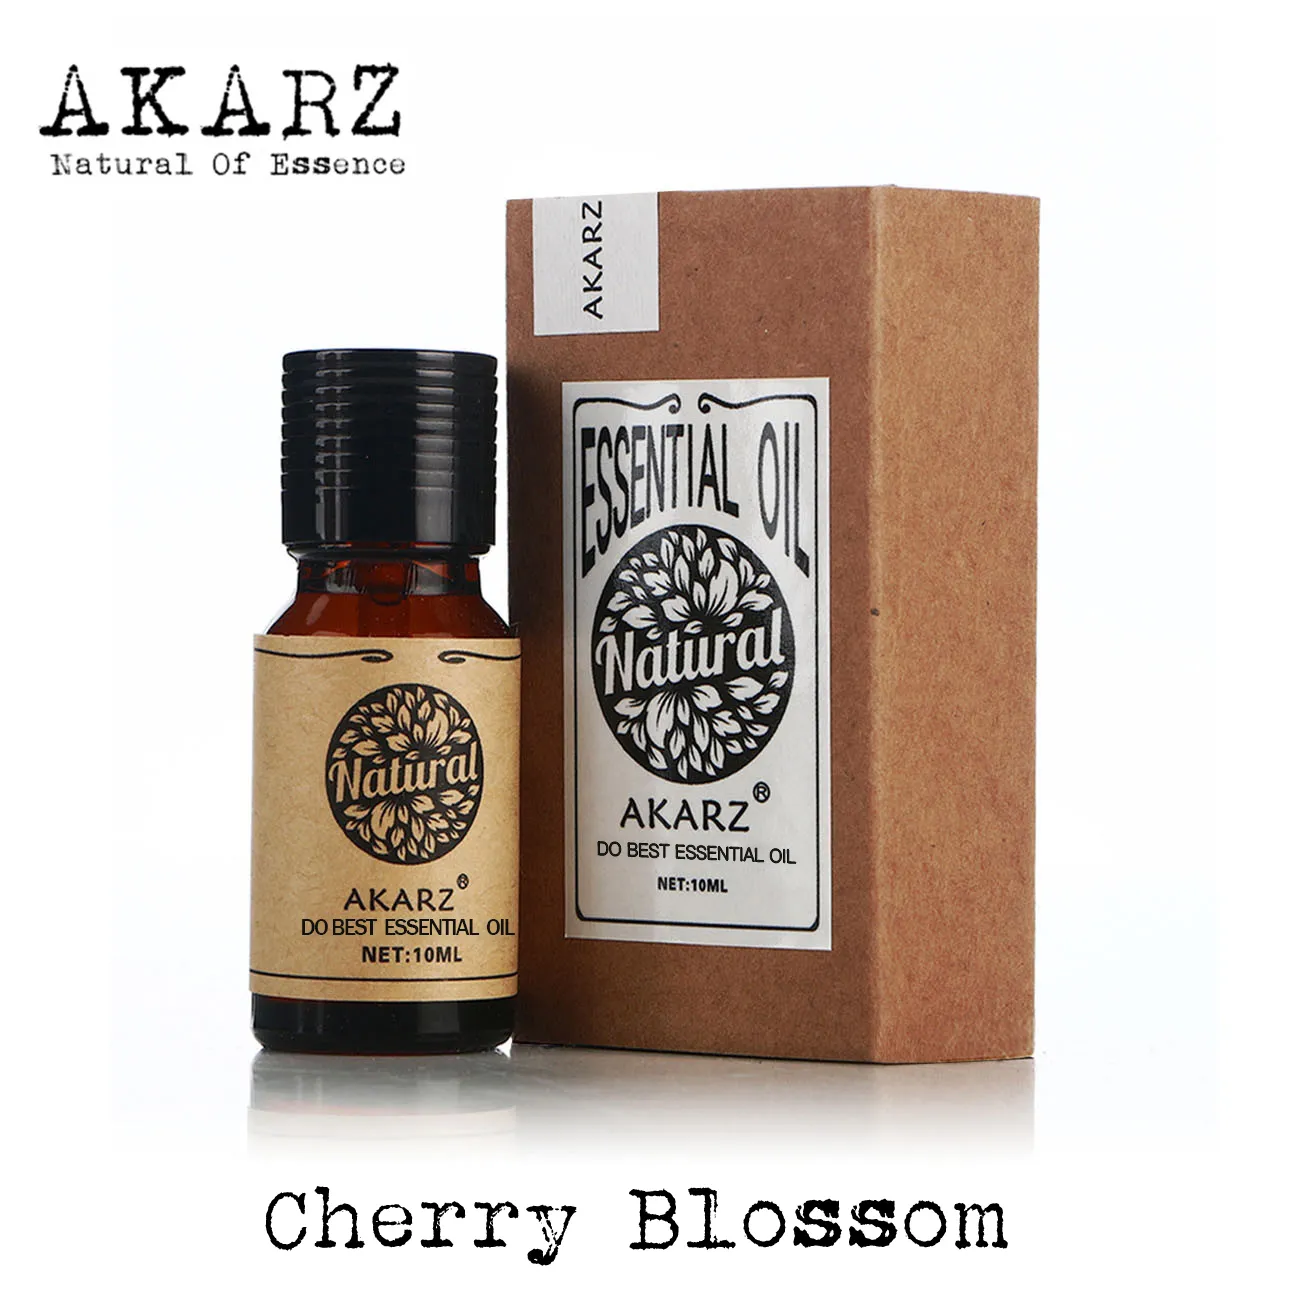 Cherry blossom oil AKARZ Famous brand natural Aromatherapy face body skin care Cherry blossom essential oil